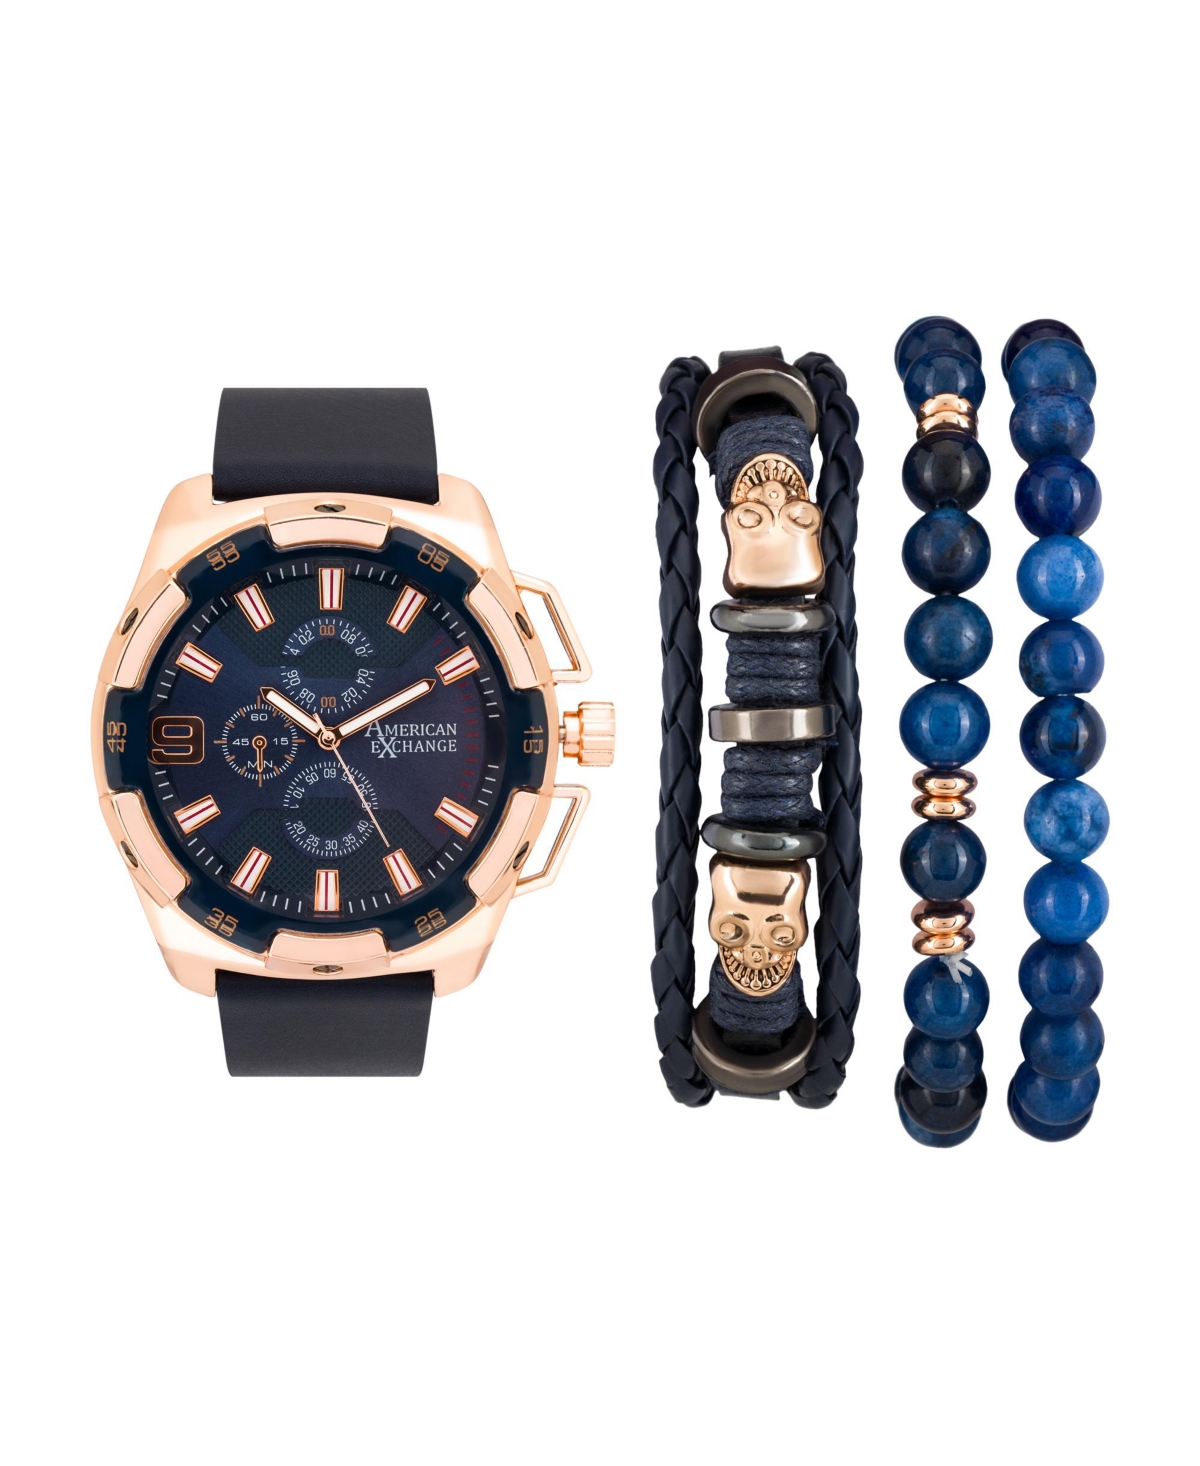 Men's Rose Gold/Midnight Blue Analog Quartz Watch And Stackable Gift Set - Brown/silver